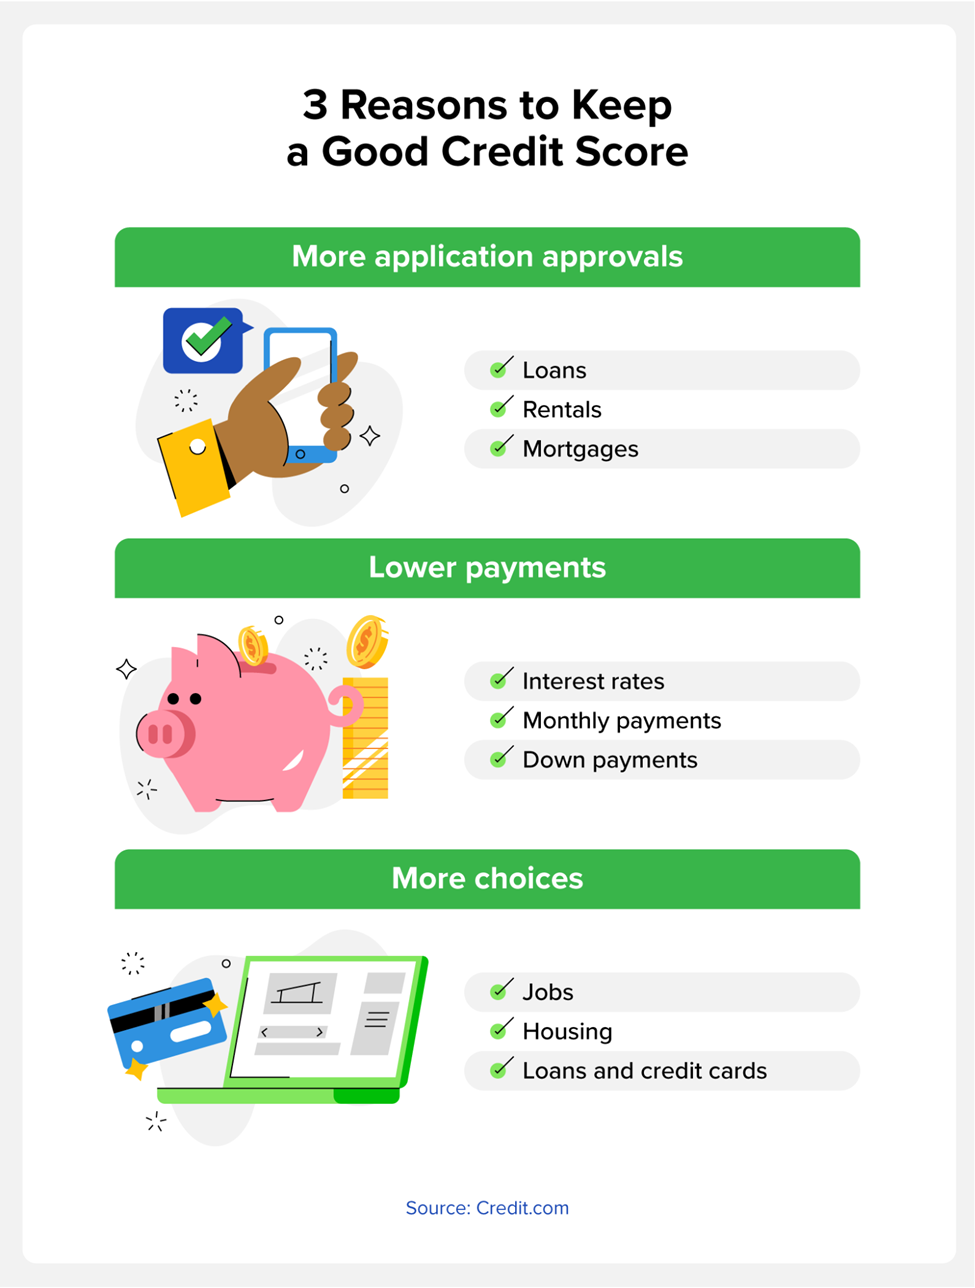 3 reasons to keep a good credit score